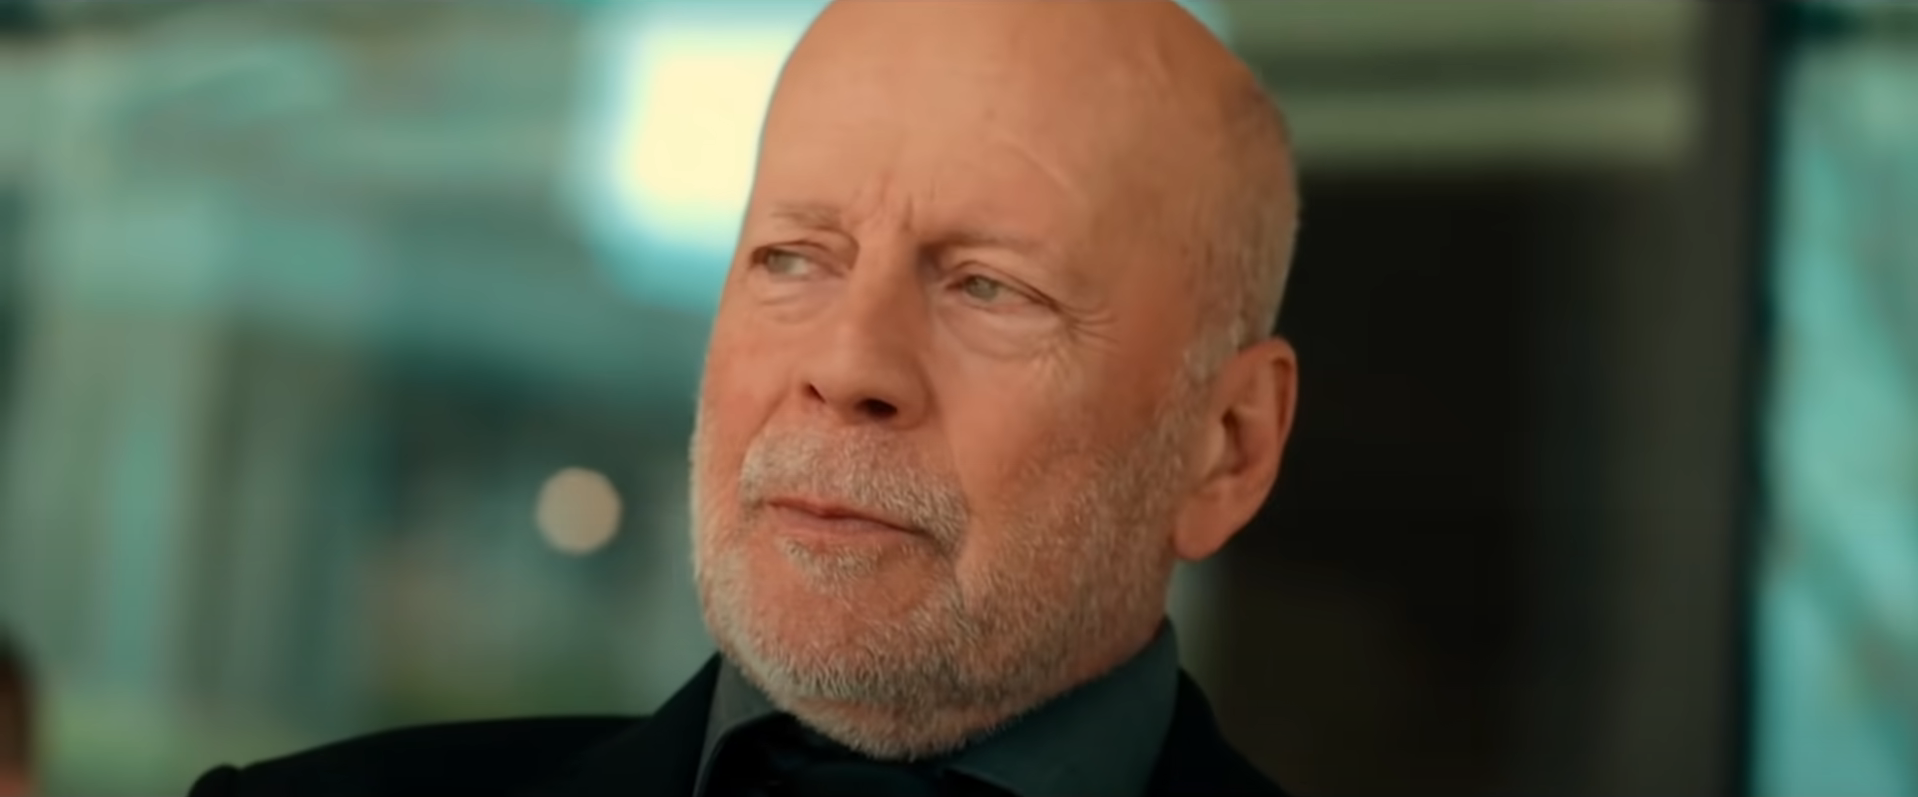 Bruce Willis announces his retirement from film for medical reasons